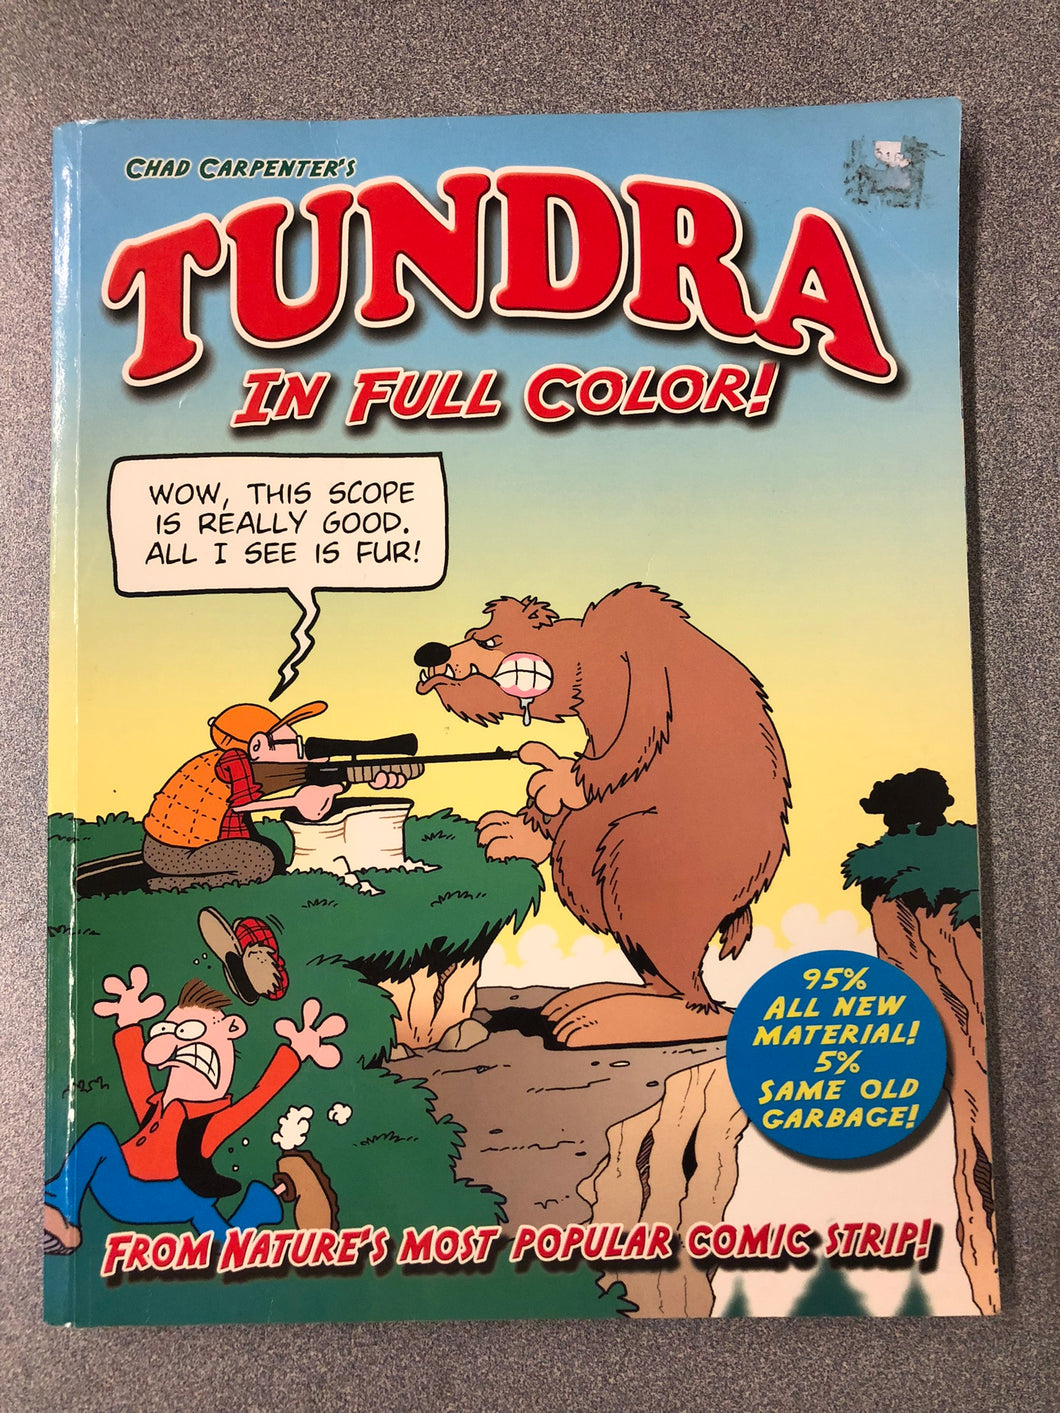 Chad Carpenter's Tundra: In Full Color: From Nature's Most Popular Comic Strip!, Carpenter, Chad, [2002] GN 8/22